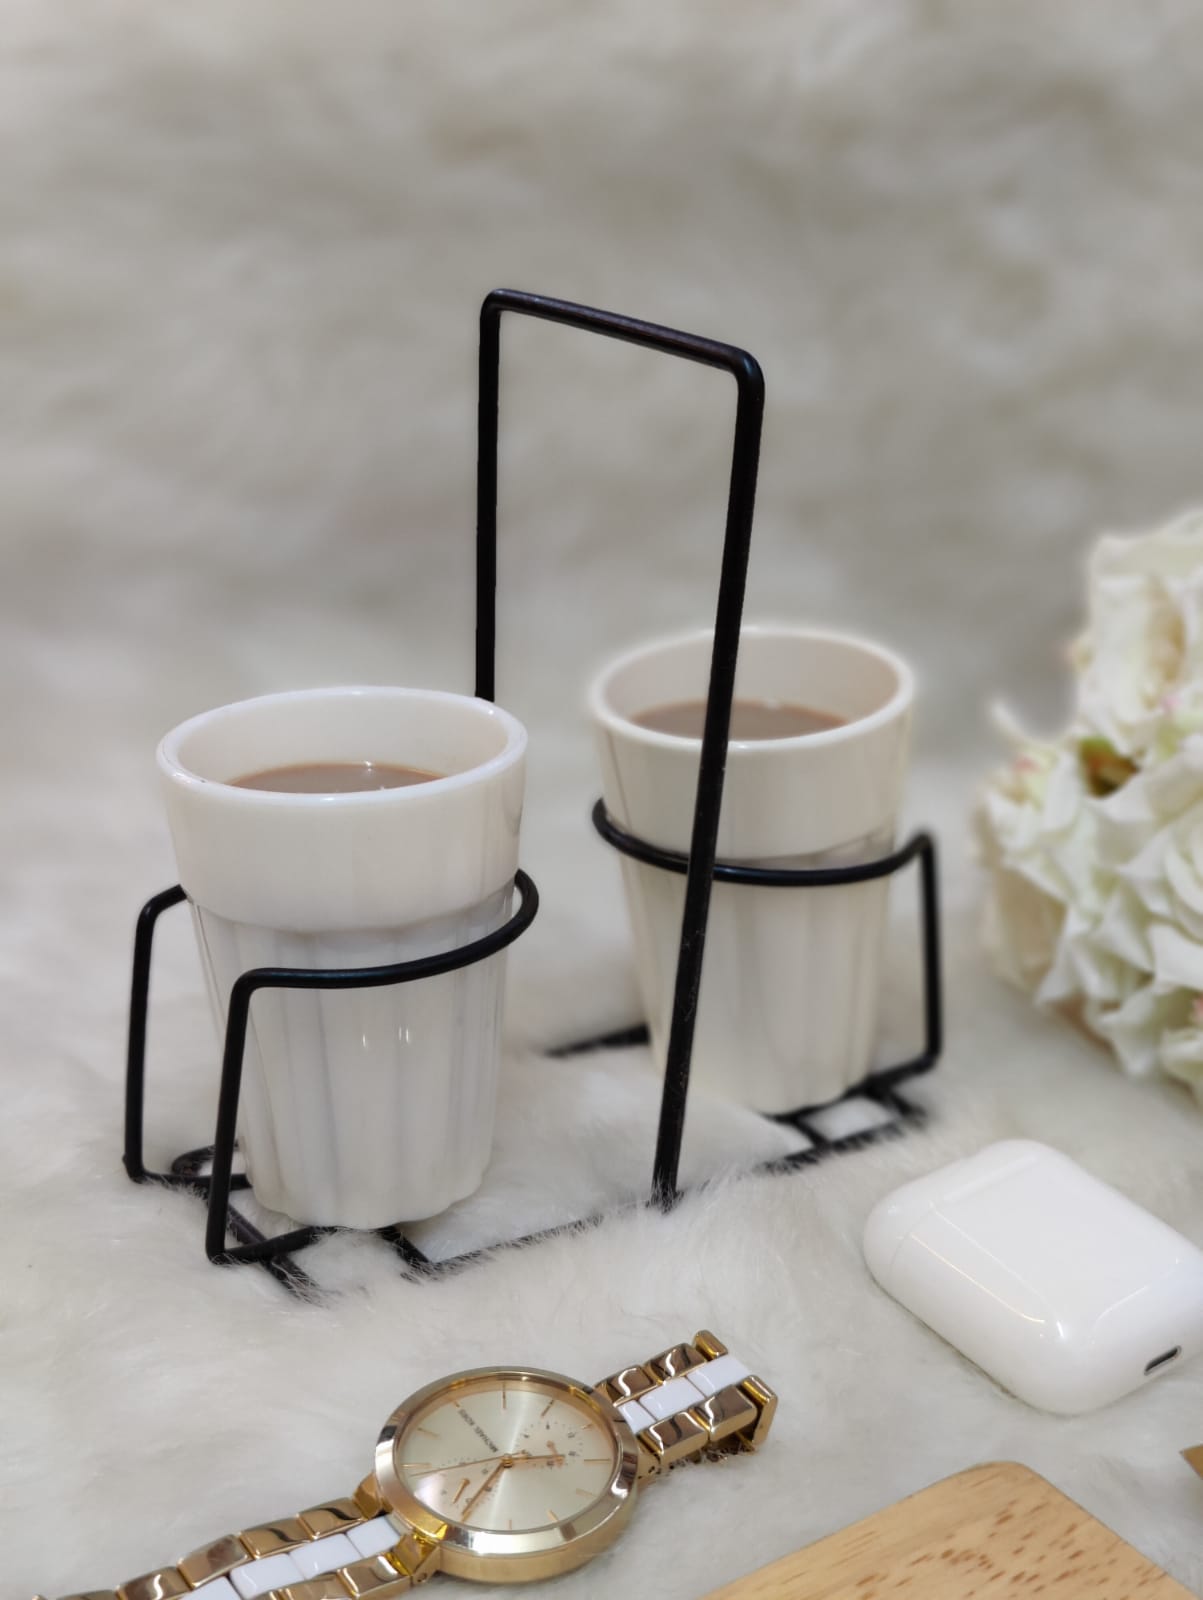 Unbreakable Cutting Chai Cups with Stand - Set of 2 - Morning Hues